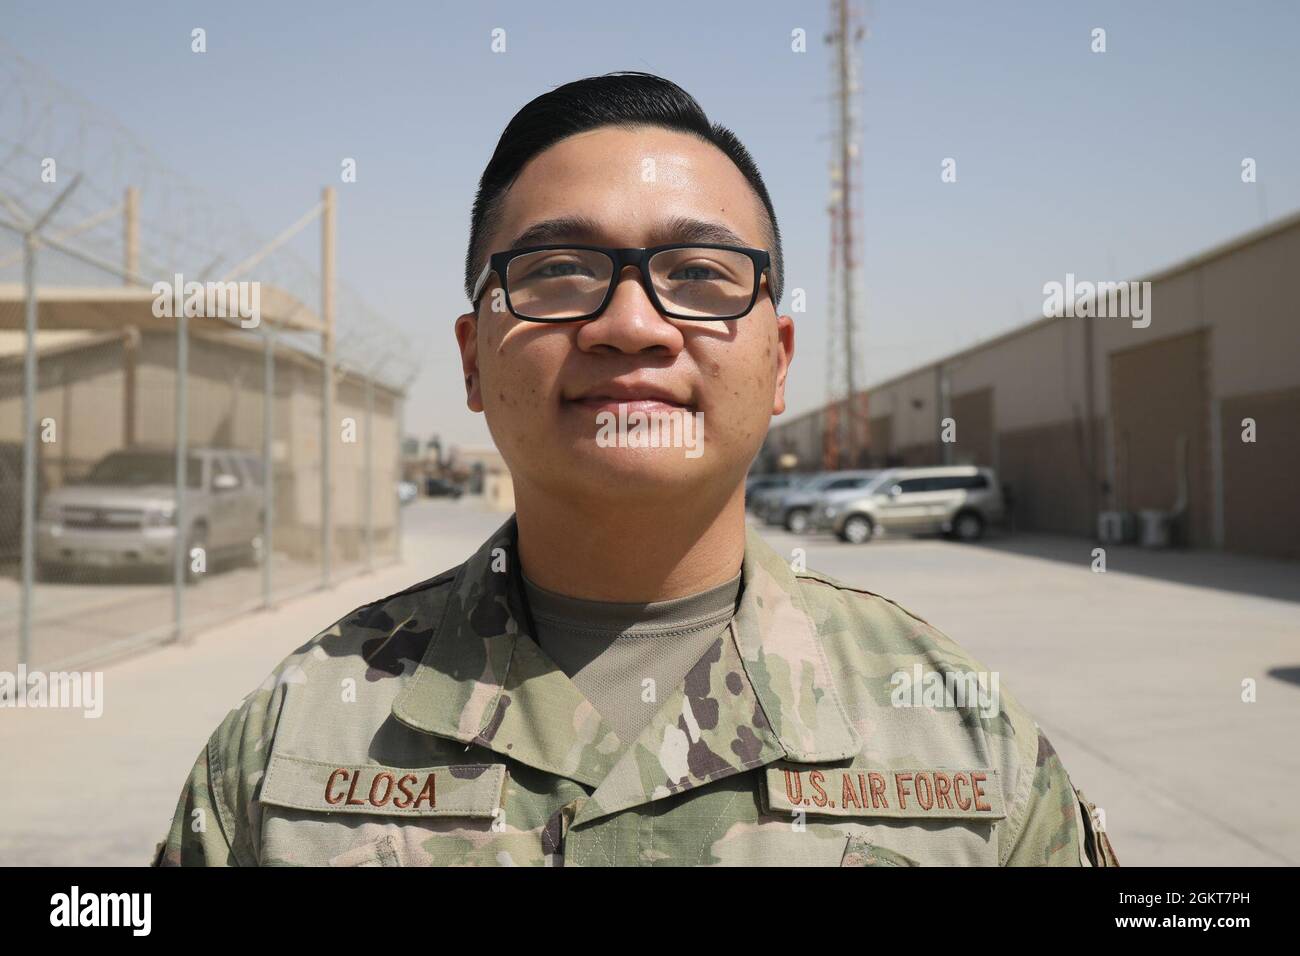 Tech Sgt. Louis V. Closa, contracting officer, 408th Contracting Sustainment Brigade, poses for a picture after an awards ceremony at Camp Arifjan, Kuwait, June 26, 2021. Closa was recognized as the Sustainer of the Week. Stock Photo